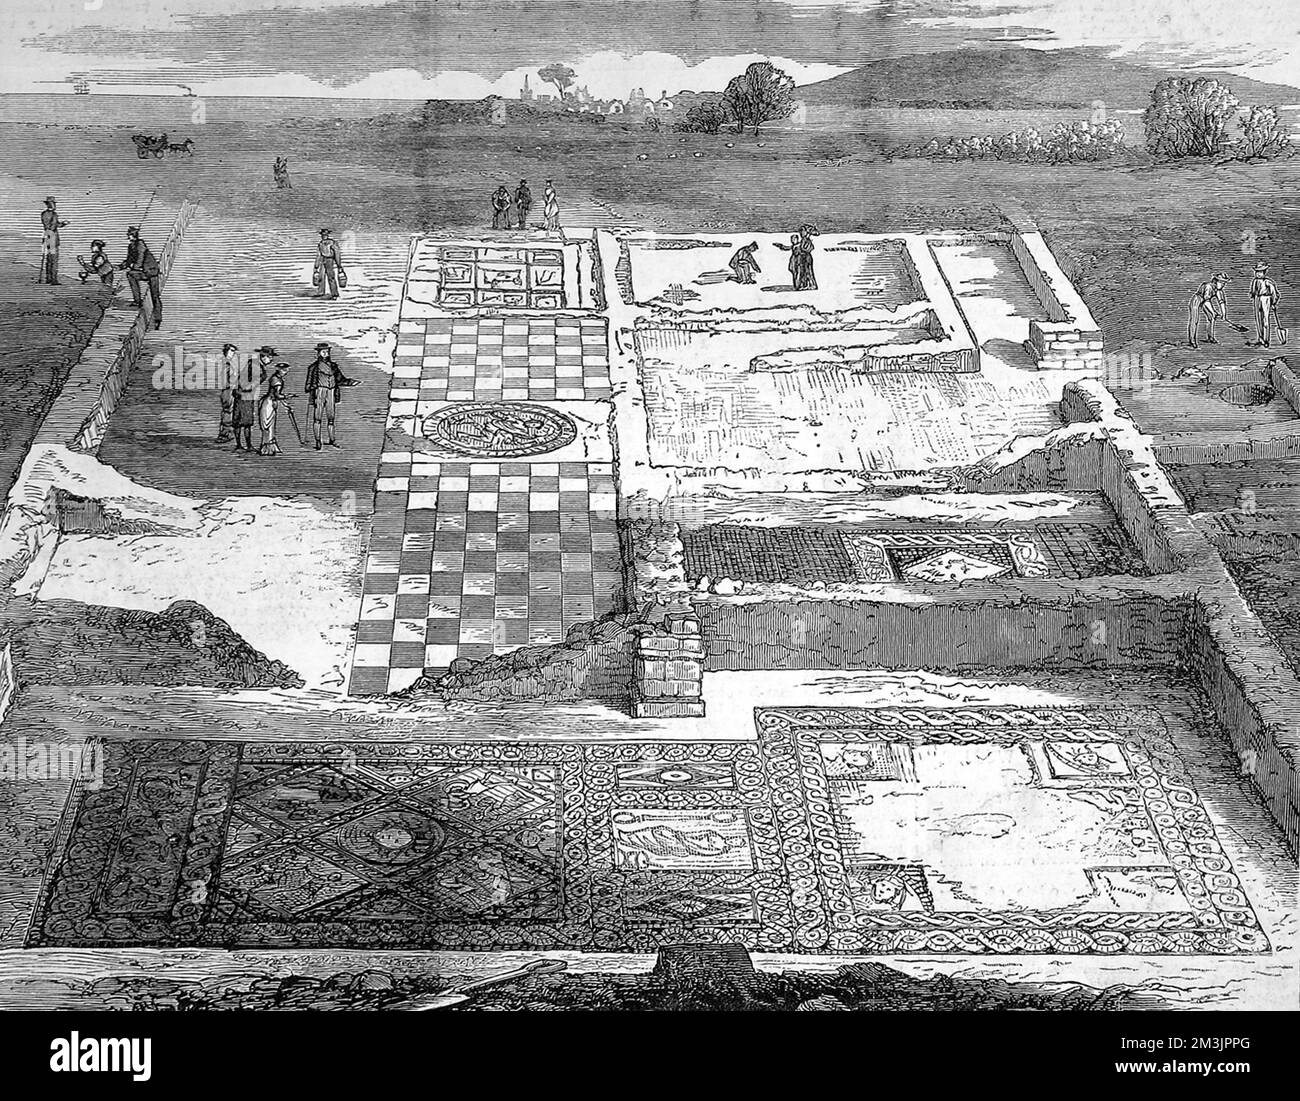 A discovery by Captain Thorpe of Yarbridge at Morton Farm, near Brading, Isle of Wight. The area was fully explored, exposing  several chambers and decorative Roman tiles. The excavations were funded by Lady Orlander of Nunwell.     Date: 9th October 1880 Stock Photo